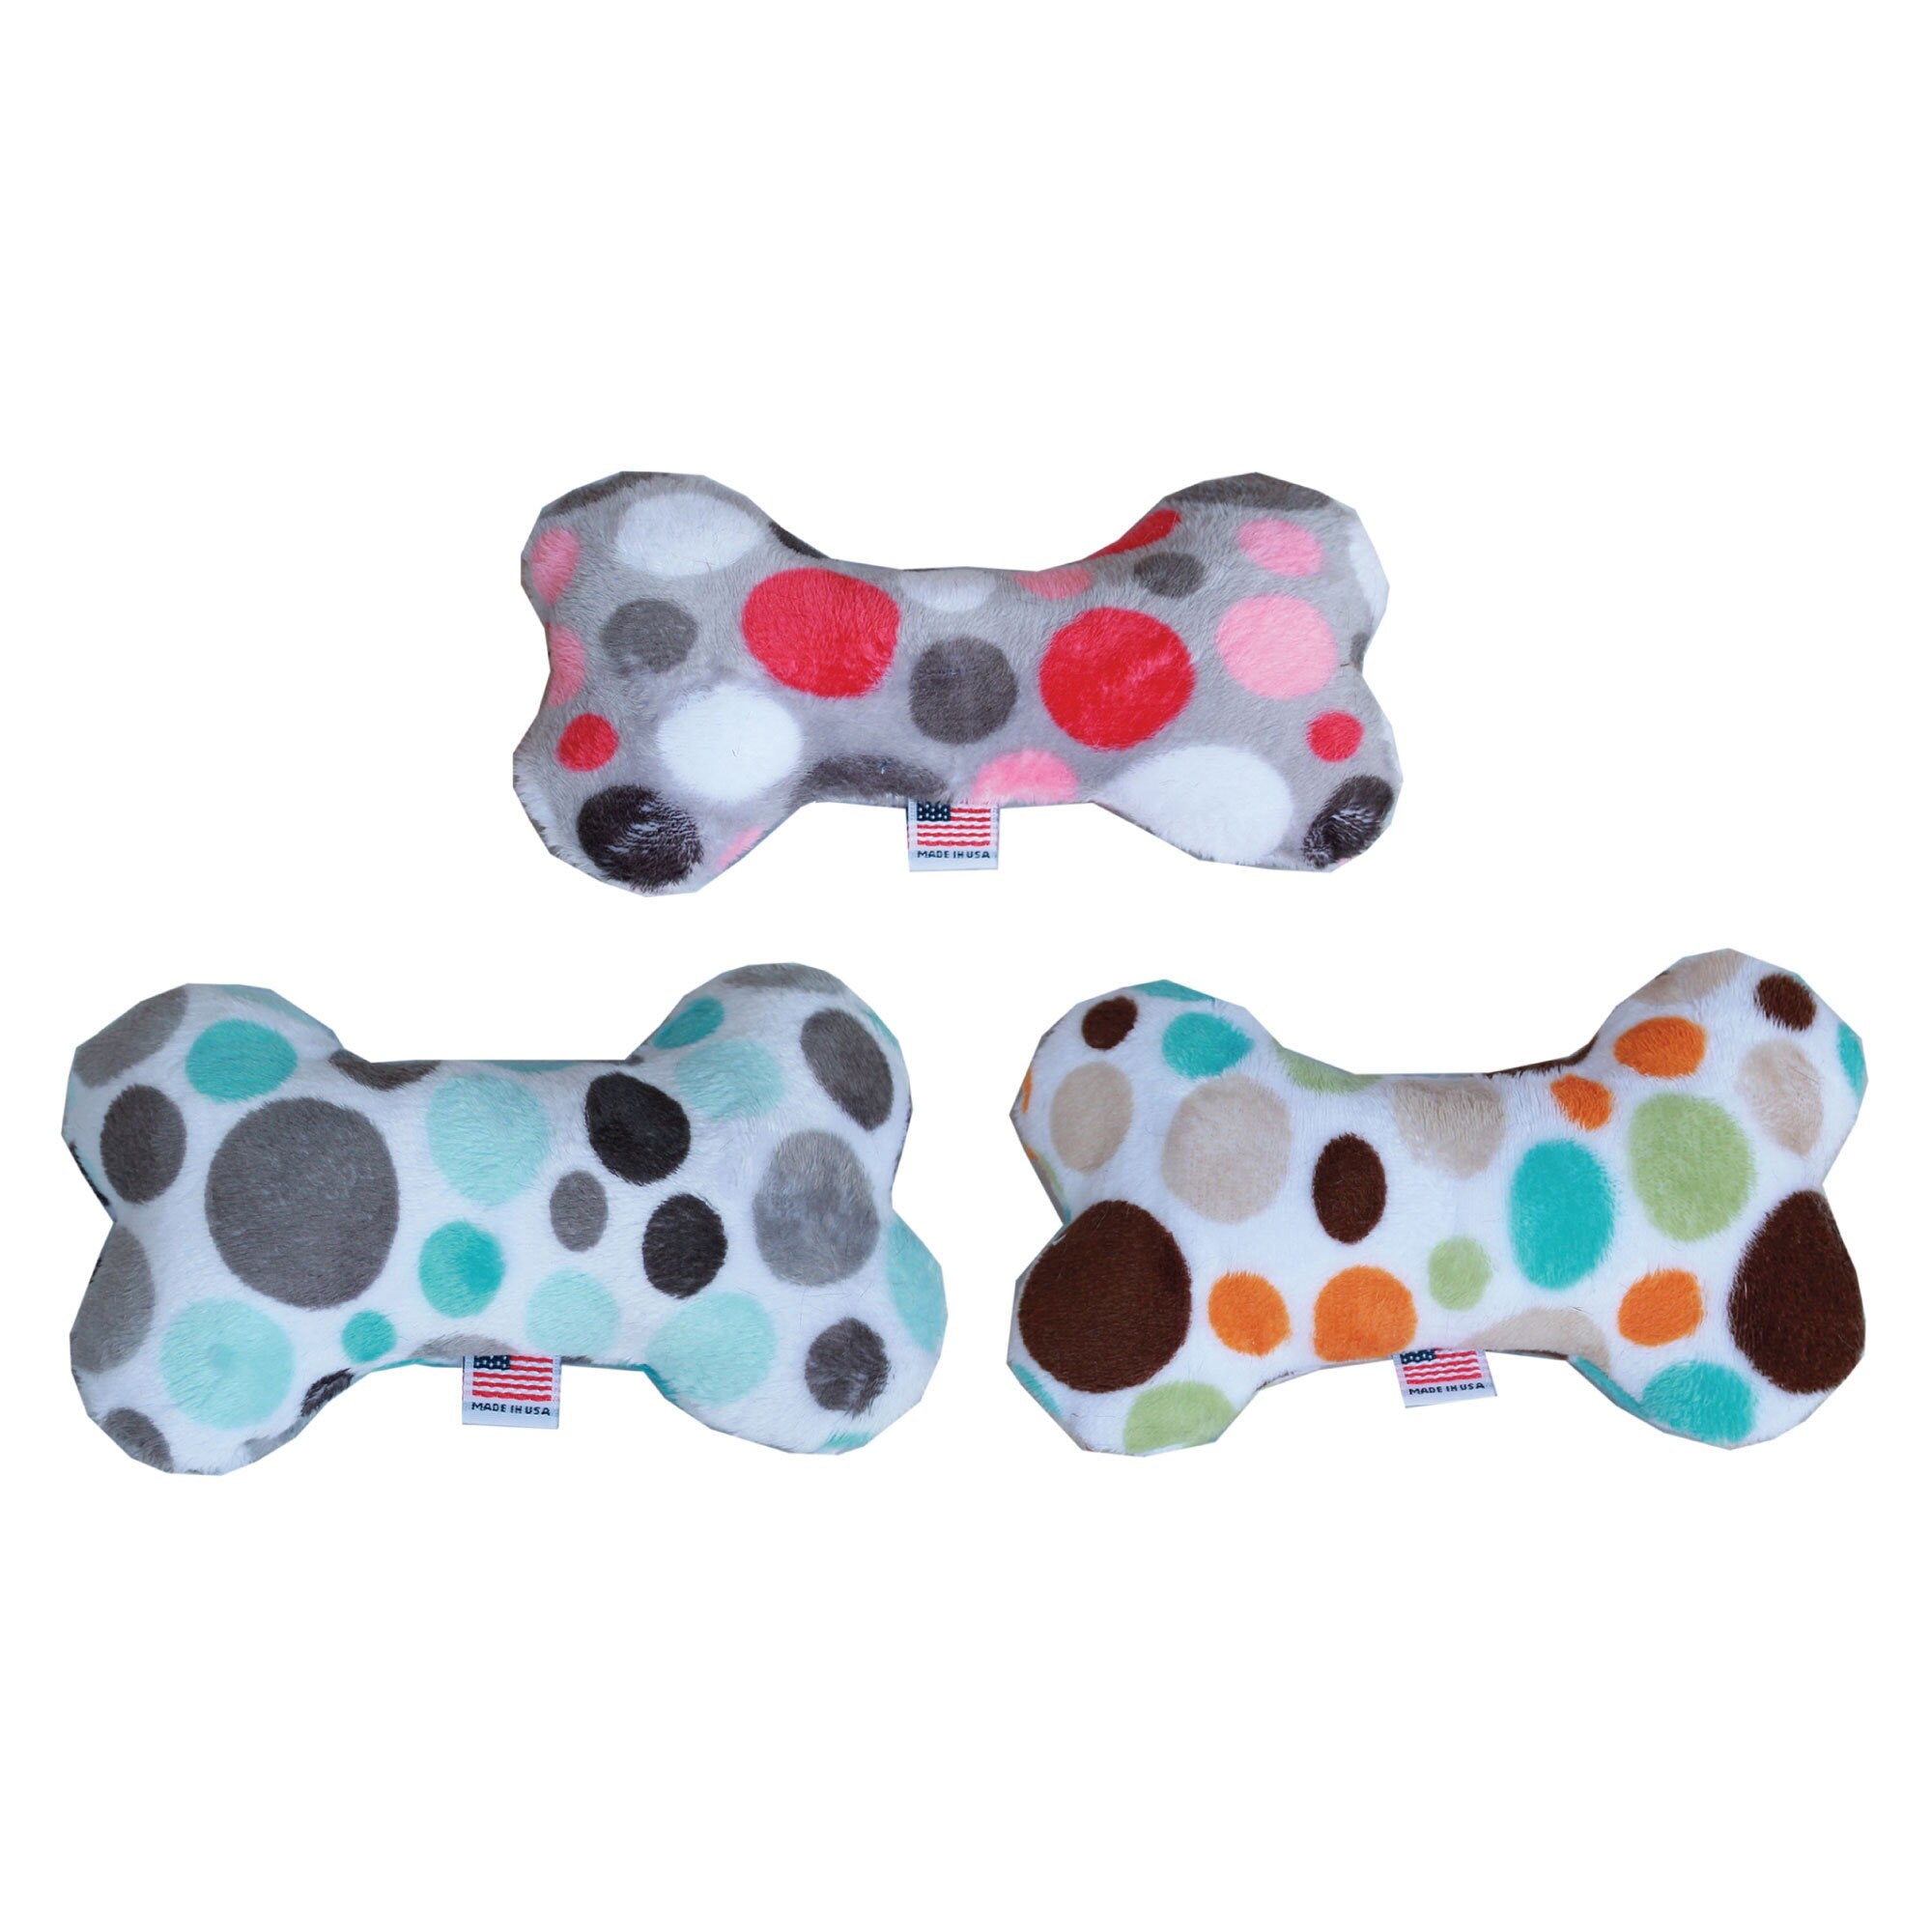 Pet and Dog Plush 6" Bone Toy, "Party Dots Group" (Available in 3 different colorway options!)